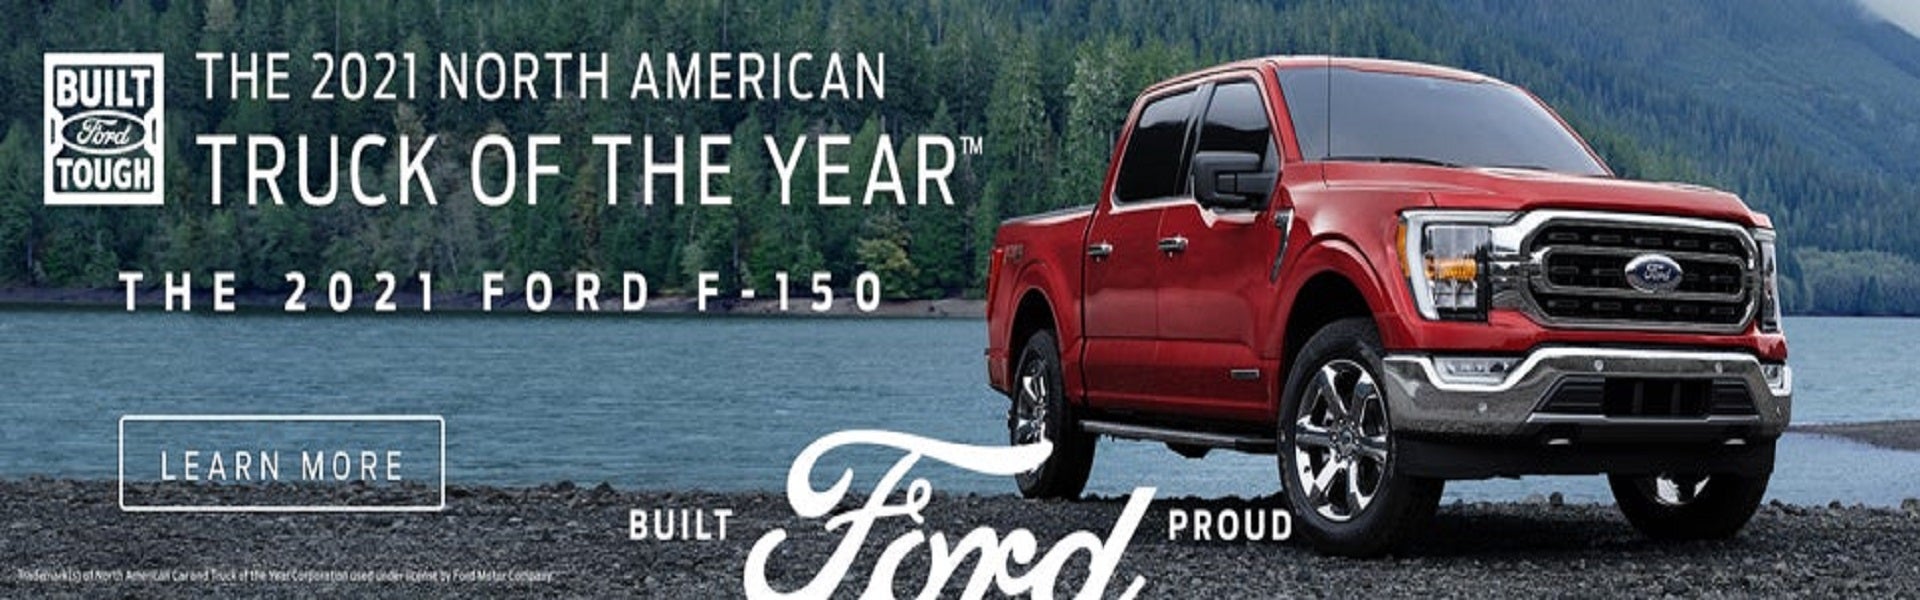 2021 North American Truck of the Year